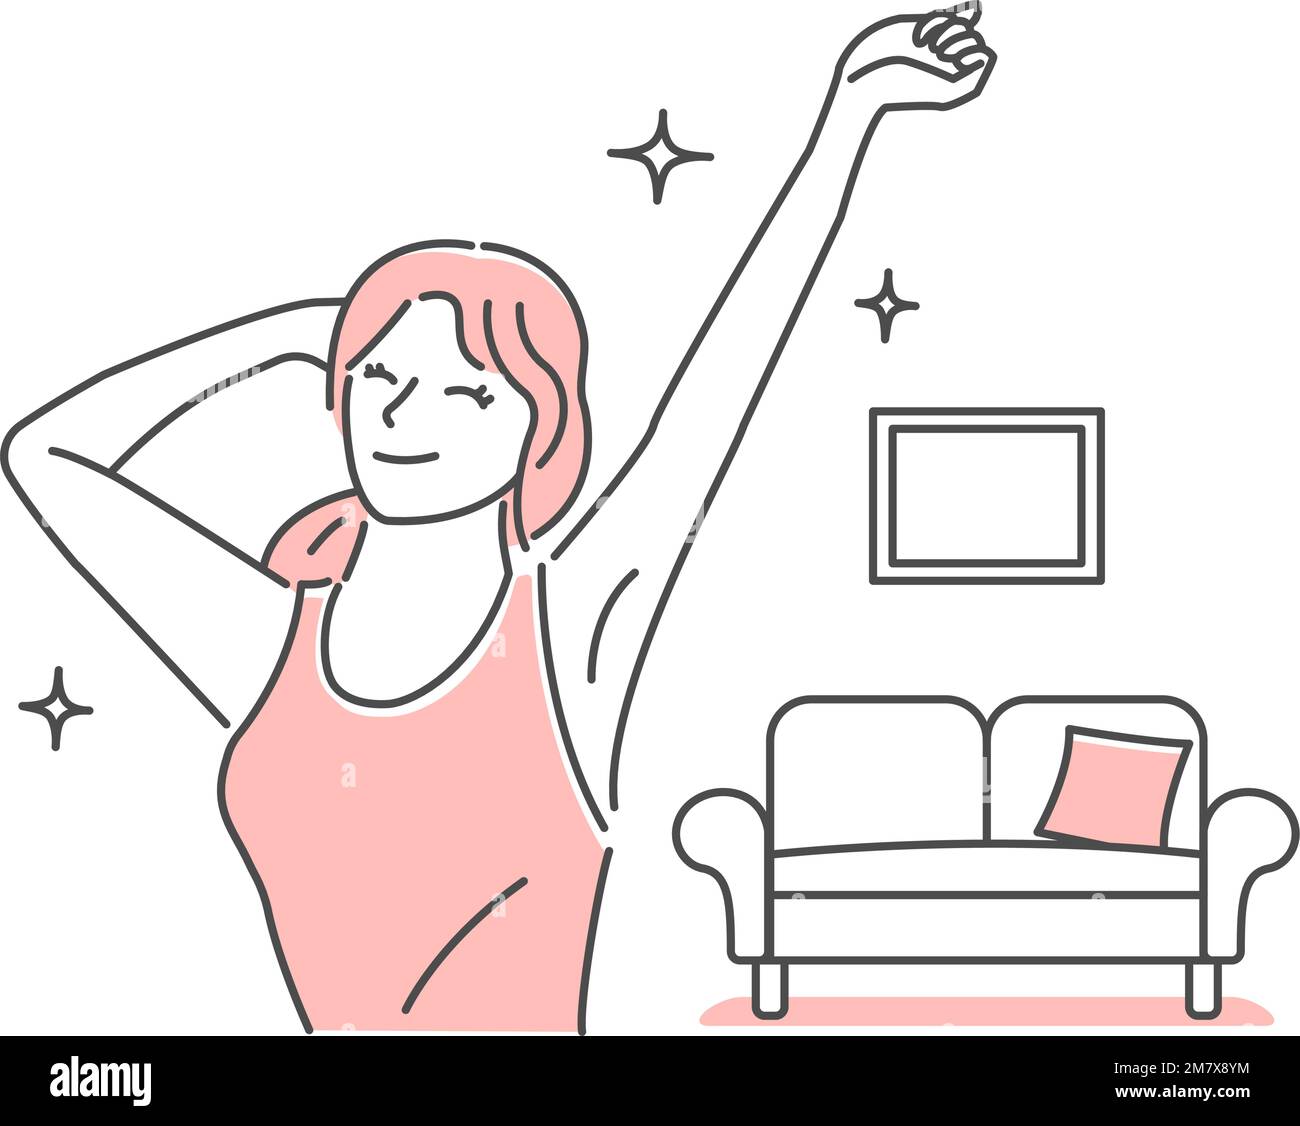 Vector illustration of a young woman stretching (healthy and positive image) Stock Vector